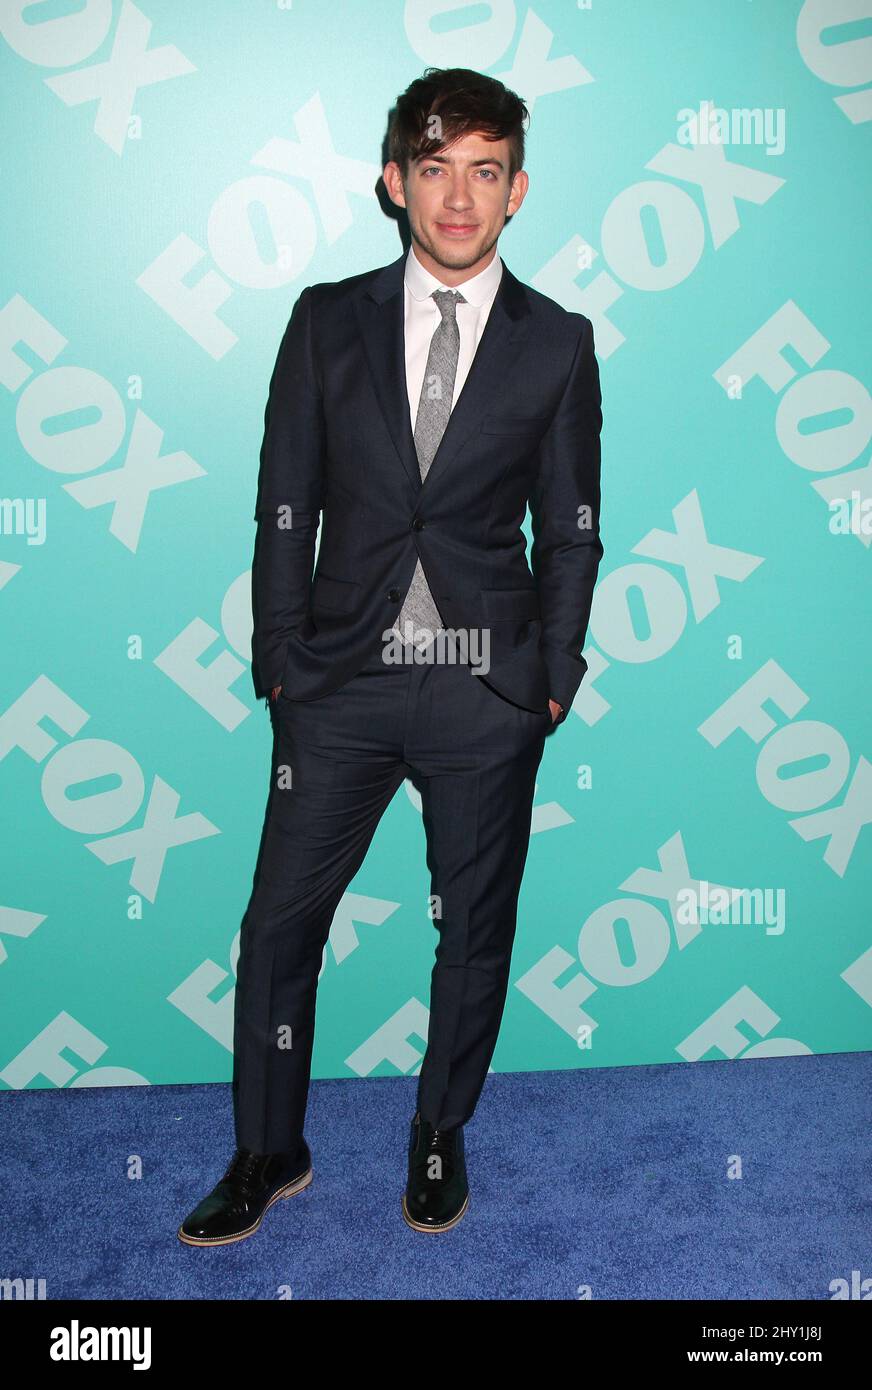 Kevin McHale attending the 2013 Fox Upfront Presentation in New York. Stock Photo